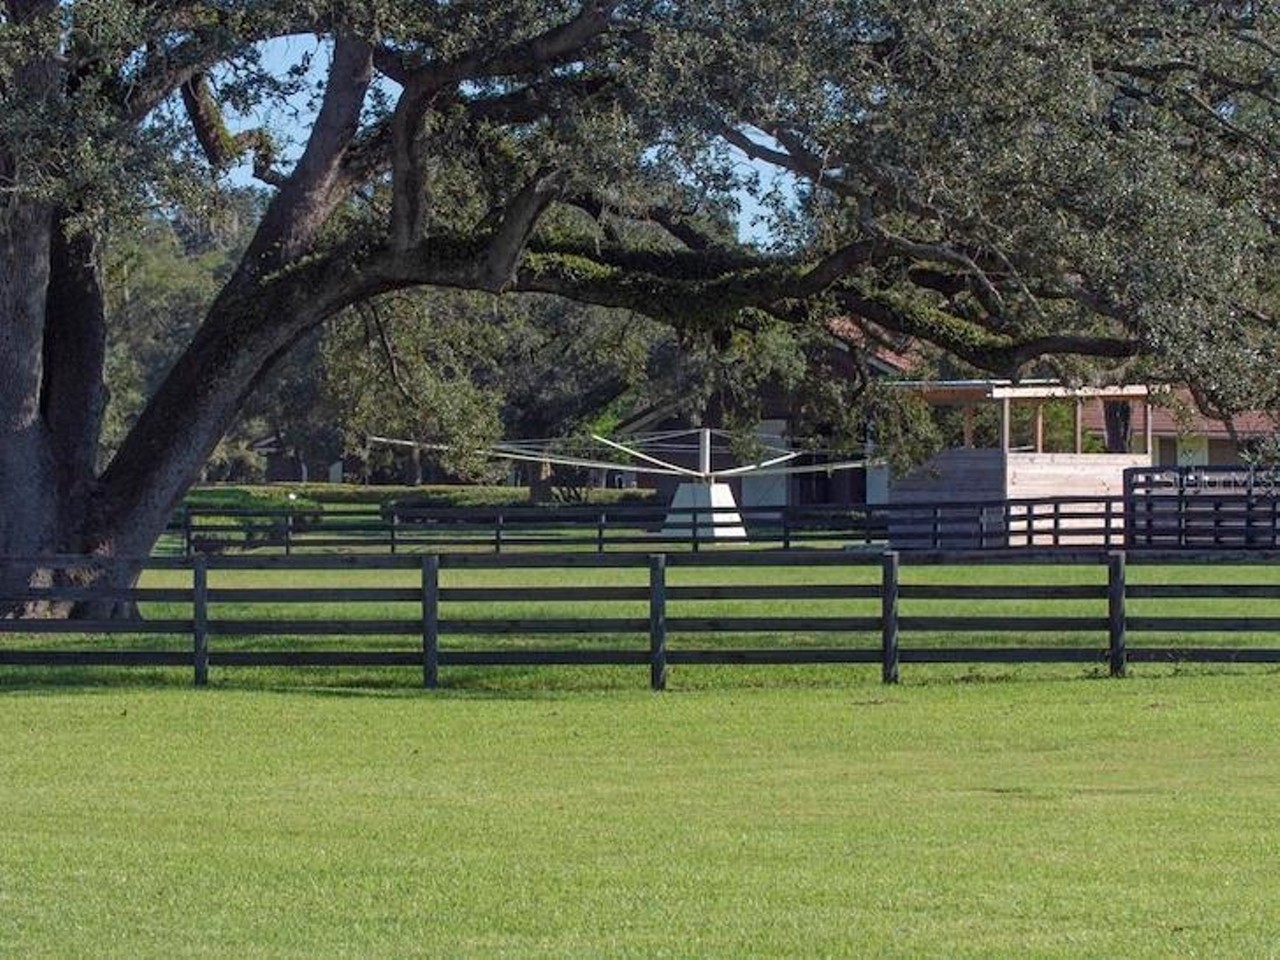 A 200-acre Ocala compound owned by the Waldrep family is now for sale